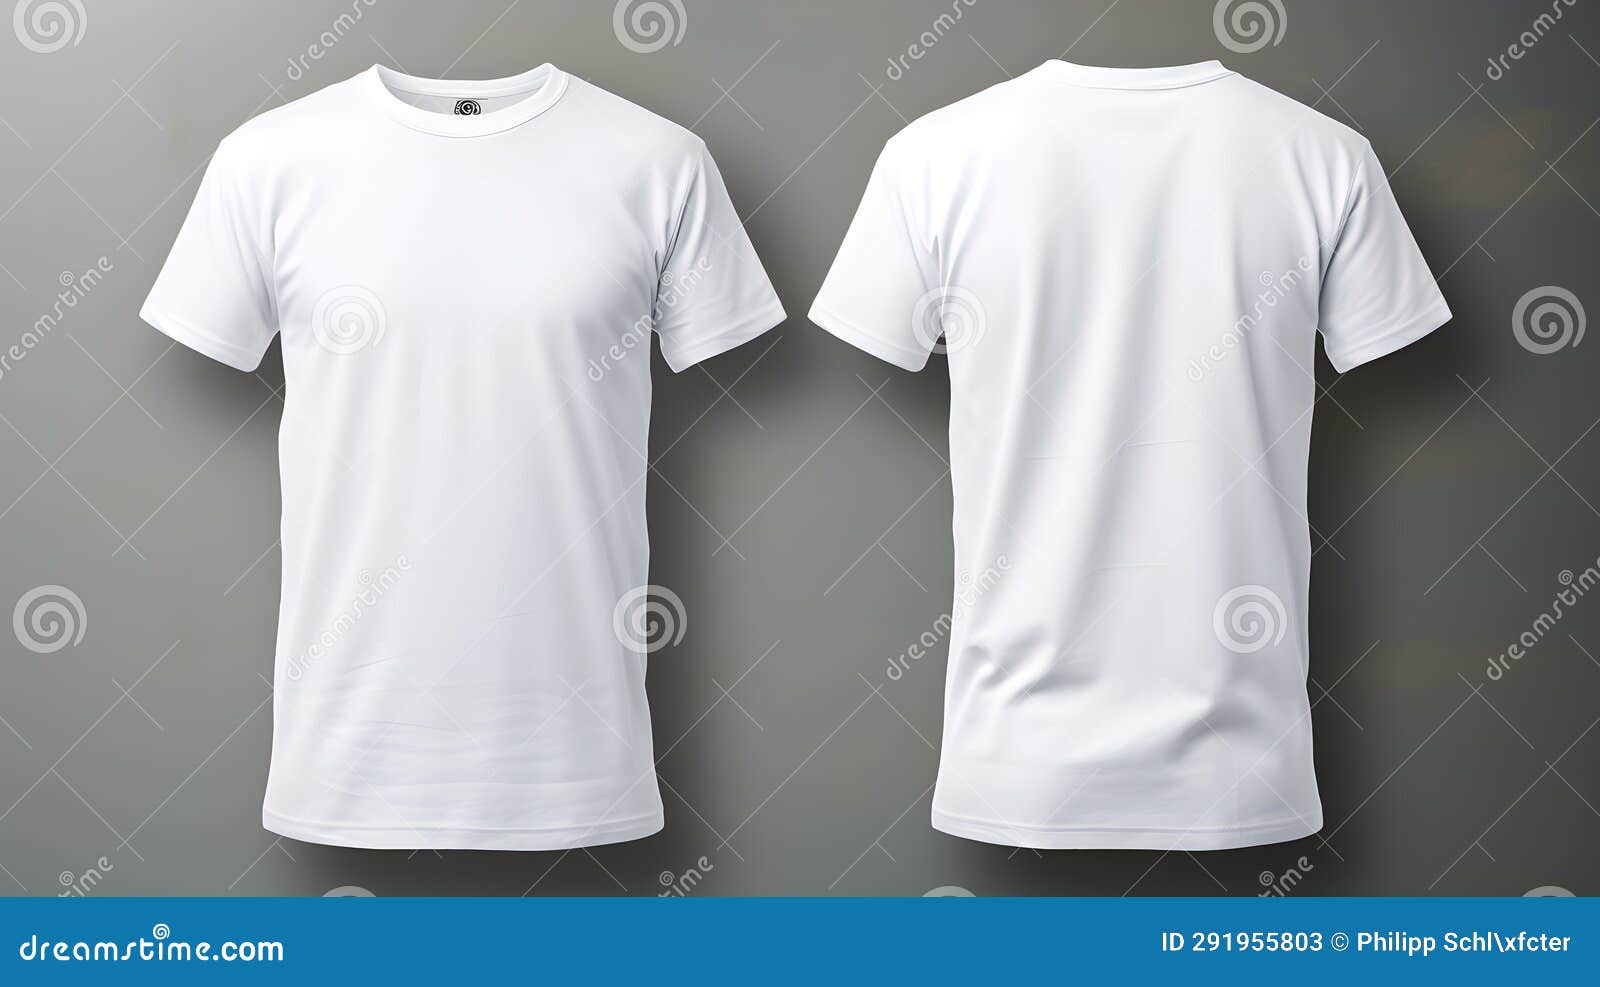 Front and Back White T-Shirt Mockup on Grey Background: Blank Apparel ...